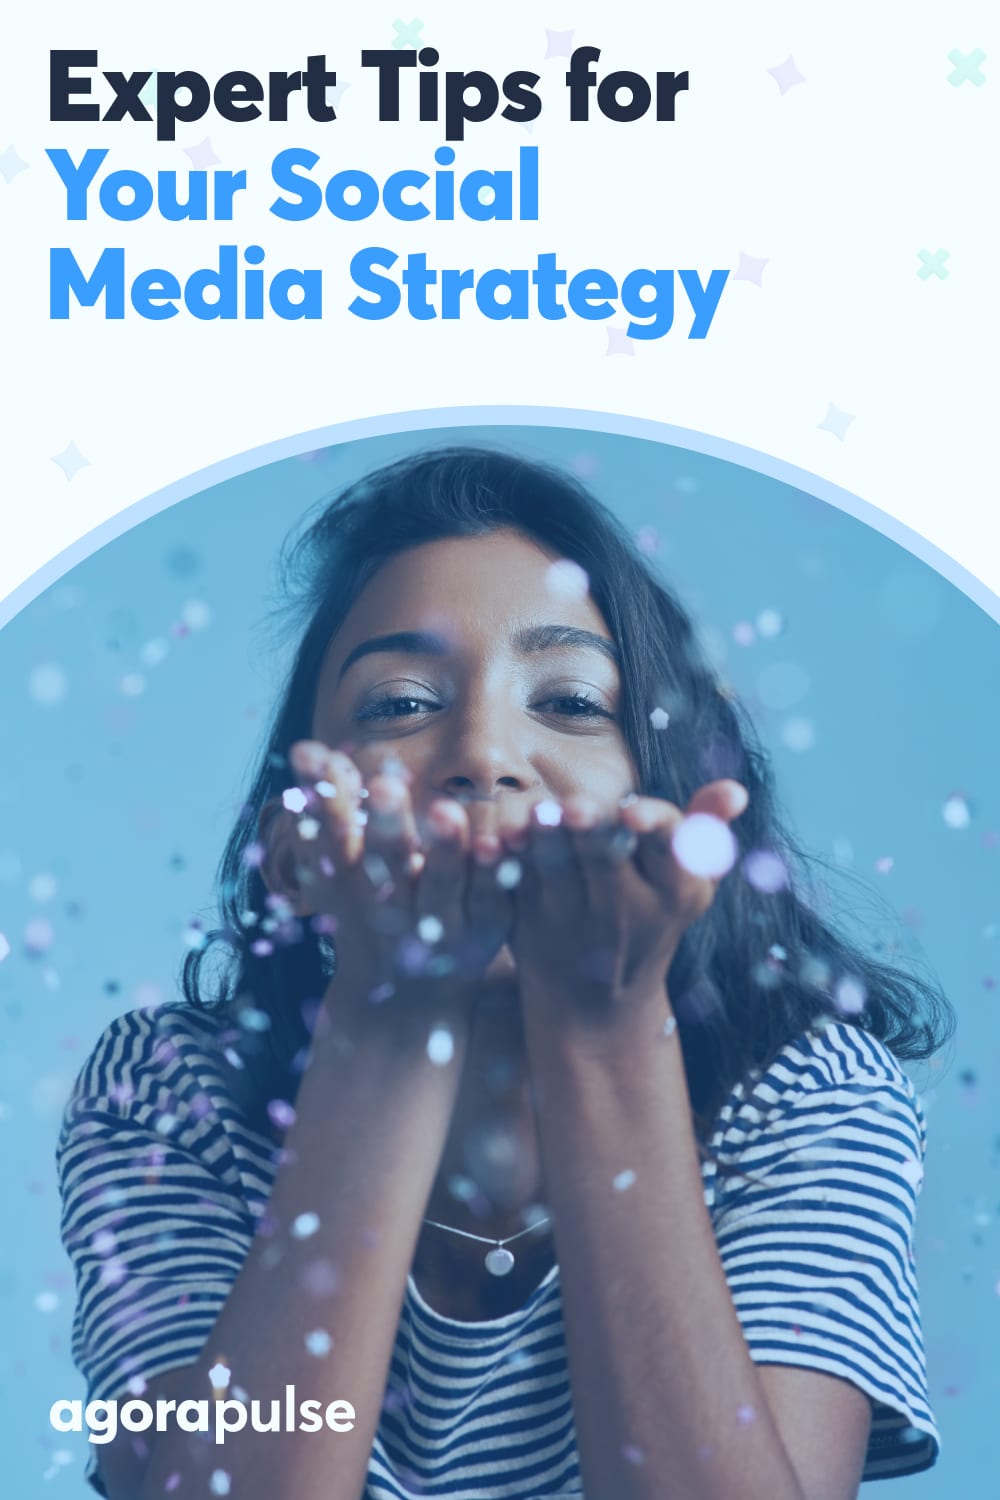 Expert Tips for Your Social Media Strategy